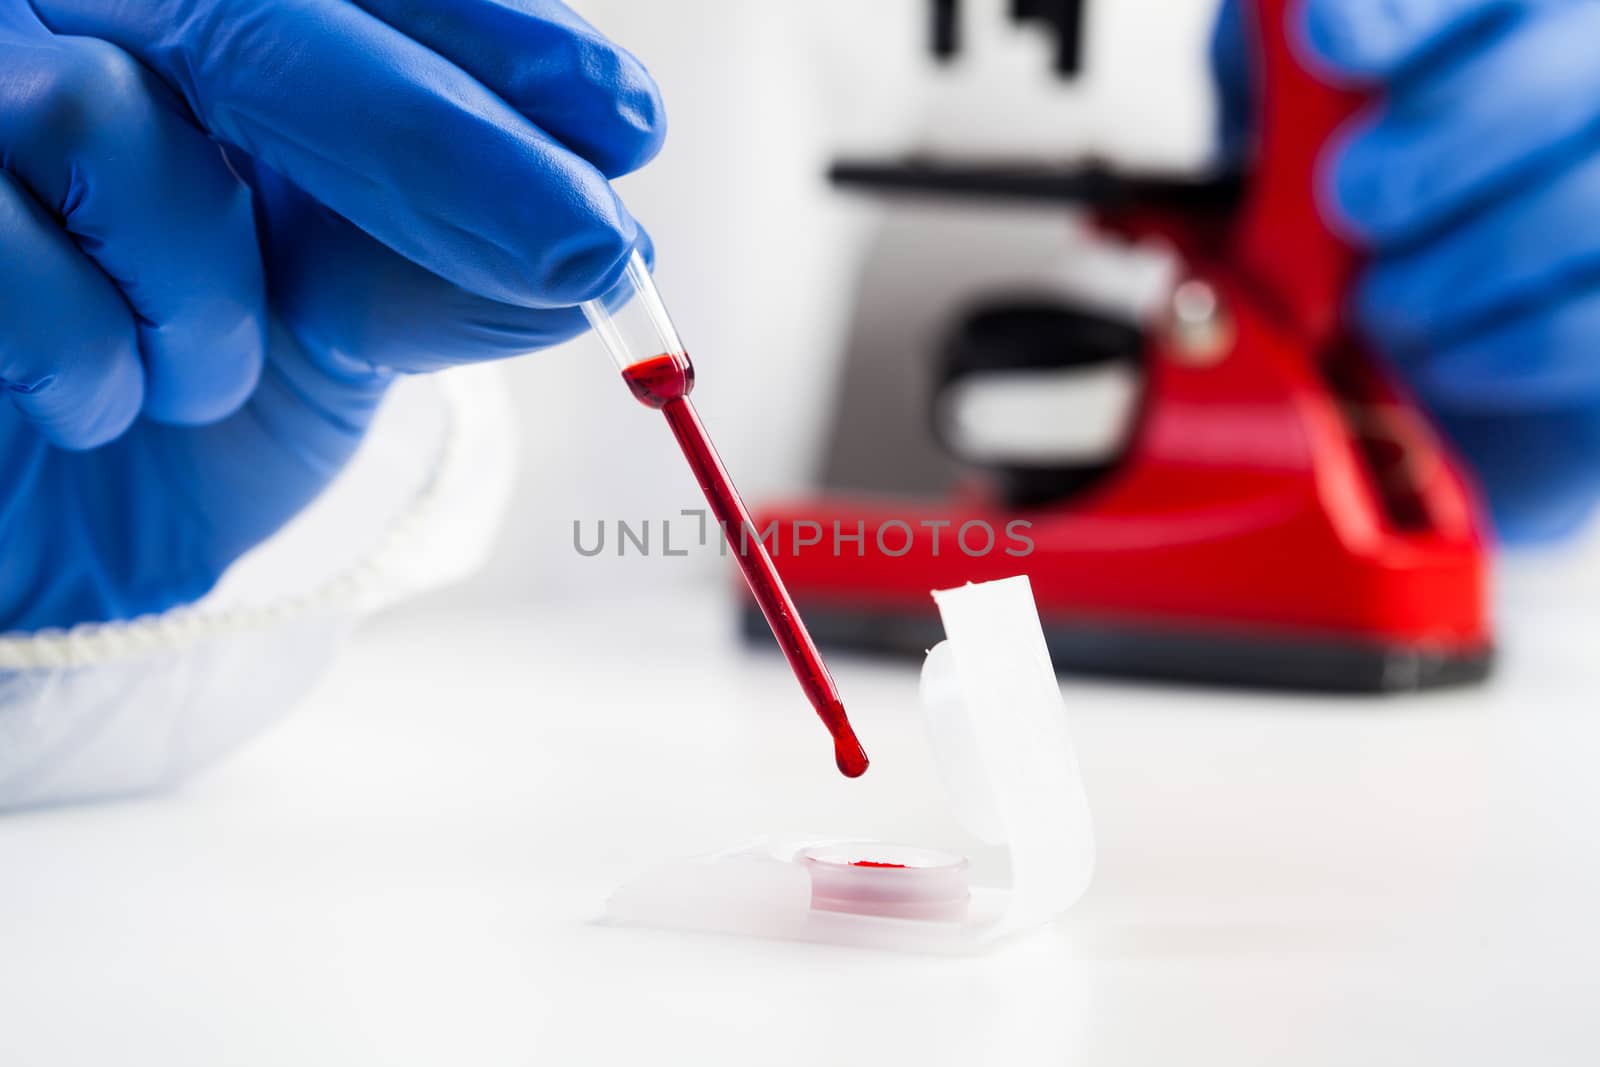 Lab scientist or medical technologist taking a blood sample usin by Plyushkin